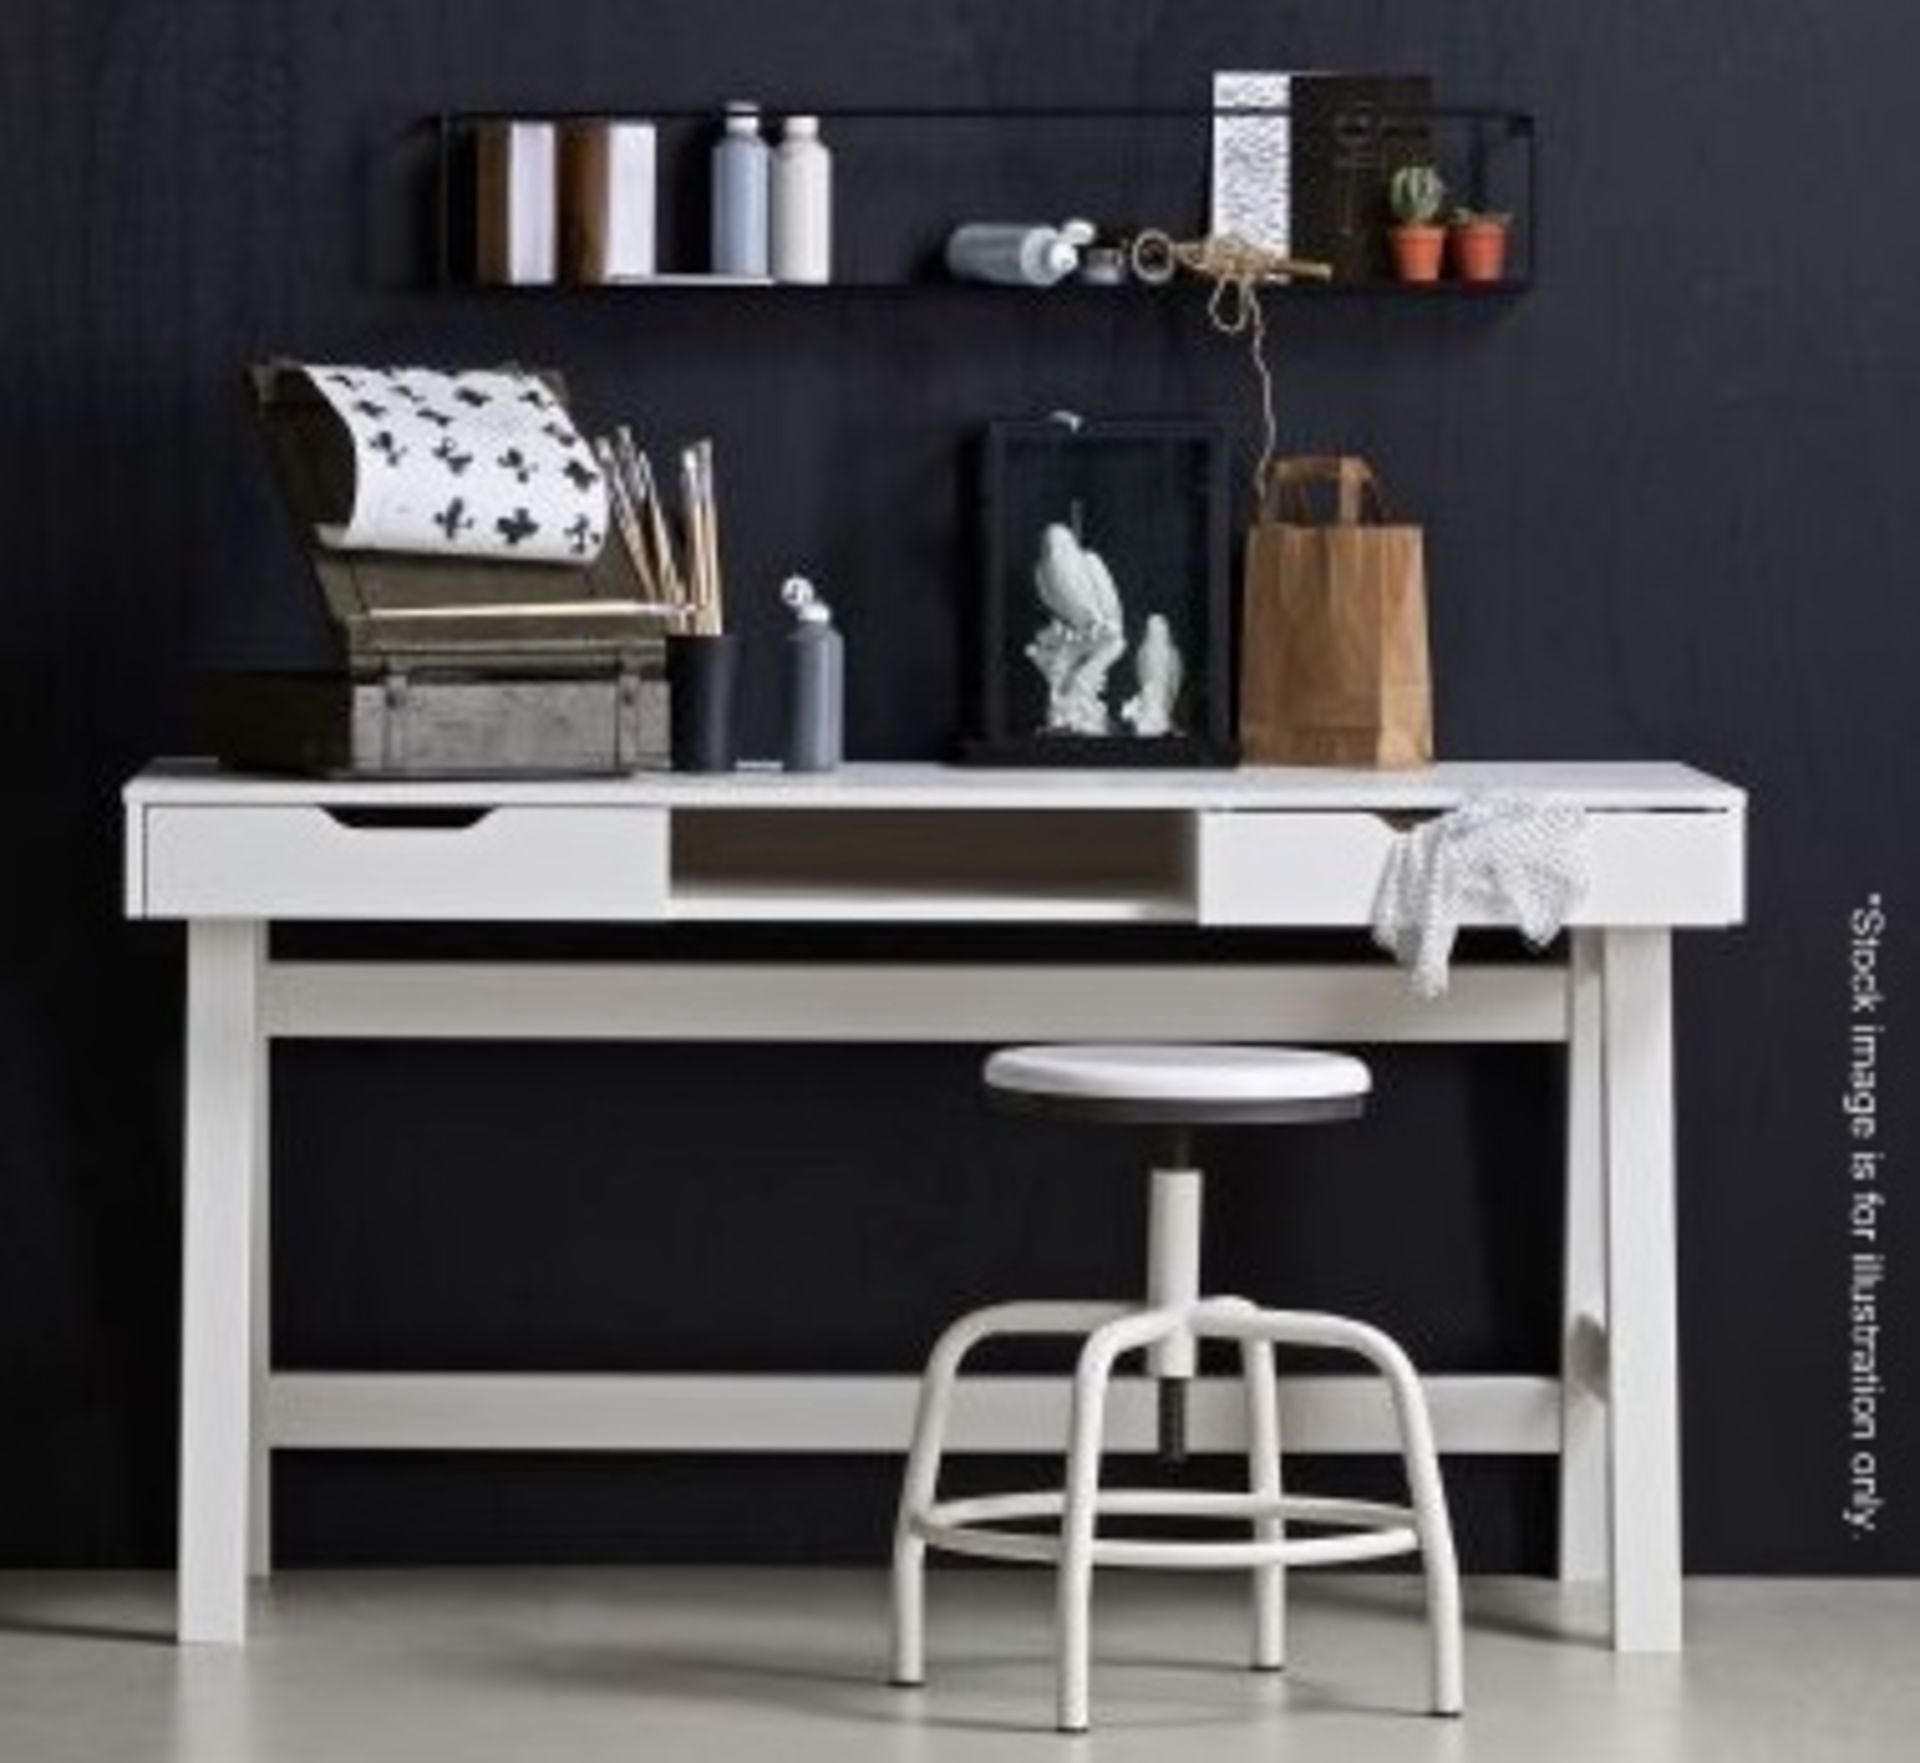 1 x WOOOD 'Nikki' Desk In White - Original Price £385.00 - Made In Holland - Sealed Boxed Stock -